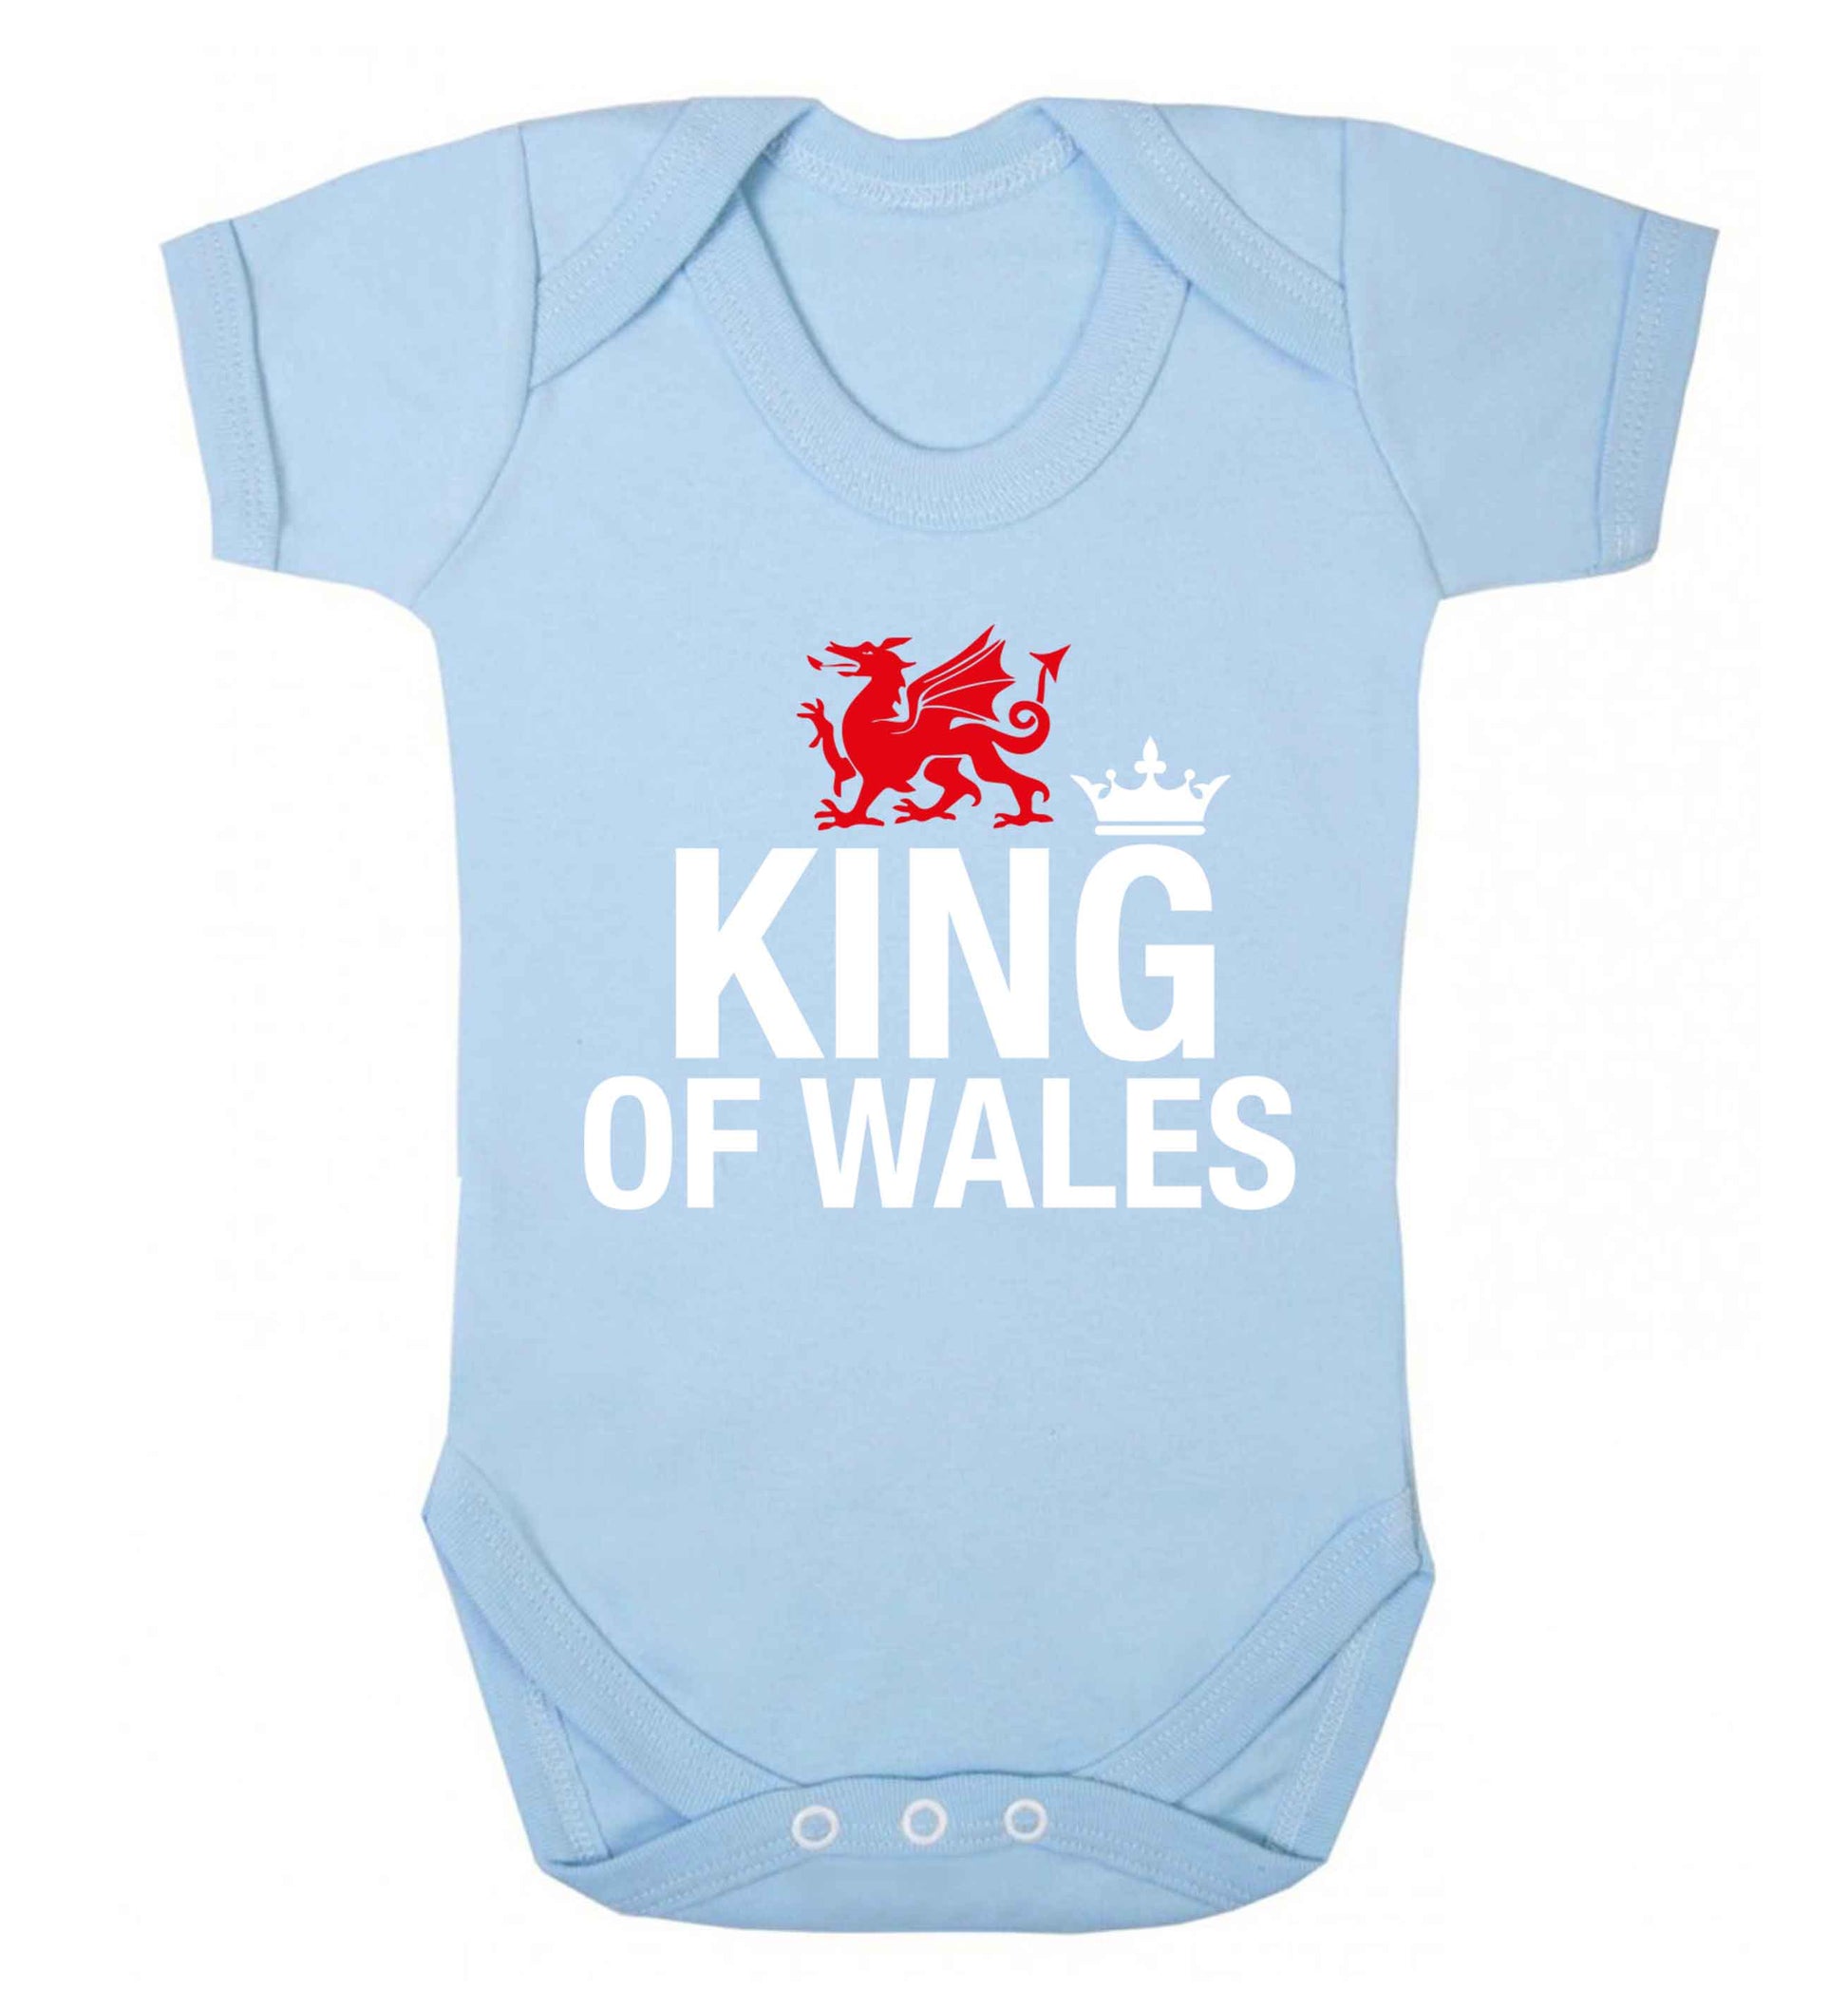 King of Wales Baby Vest pale blue 18-24 months